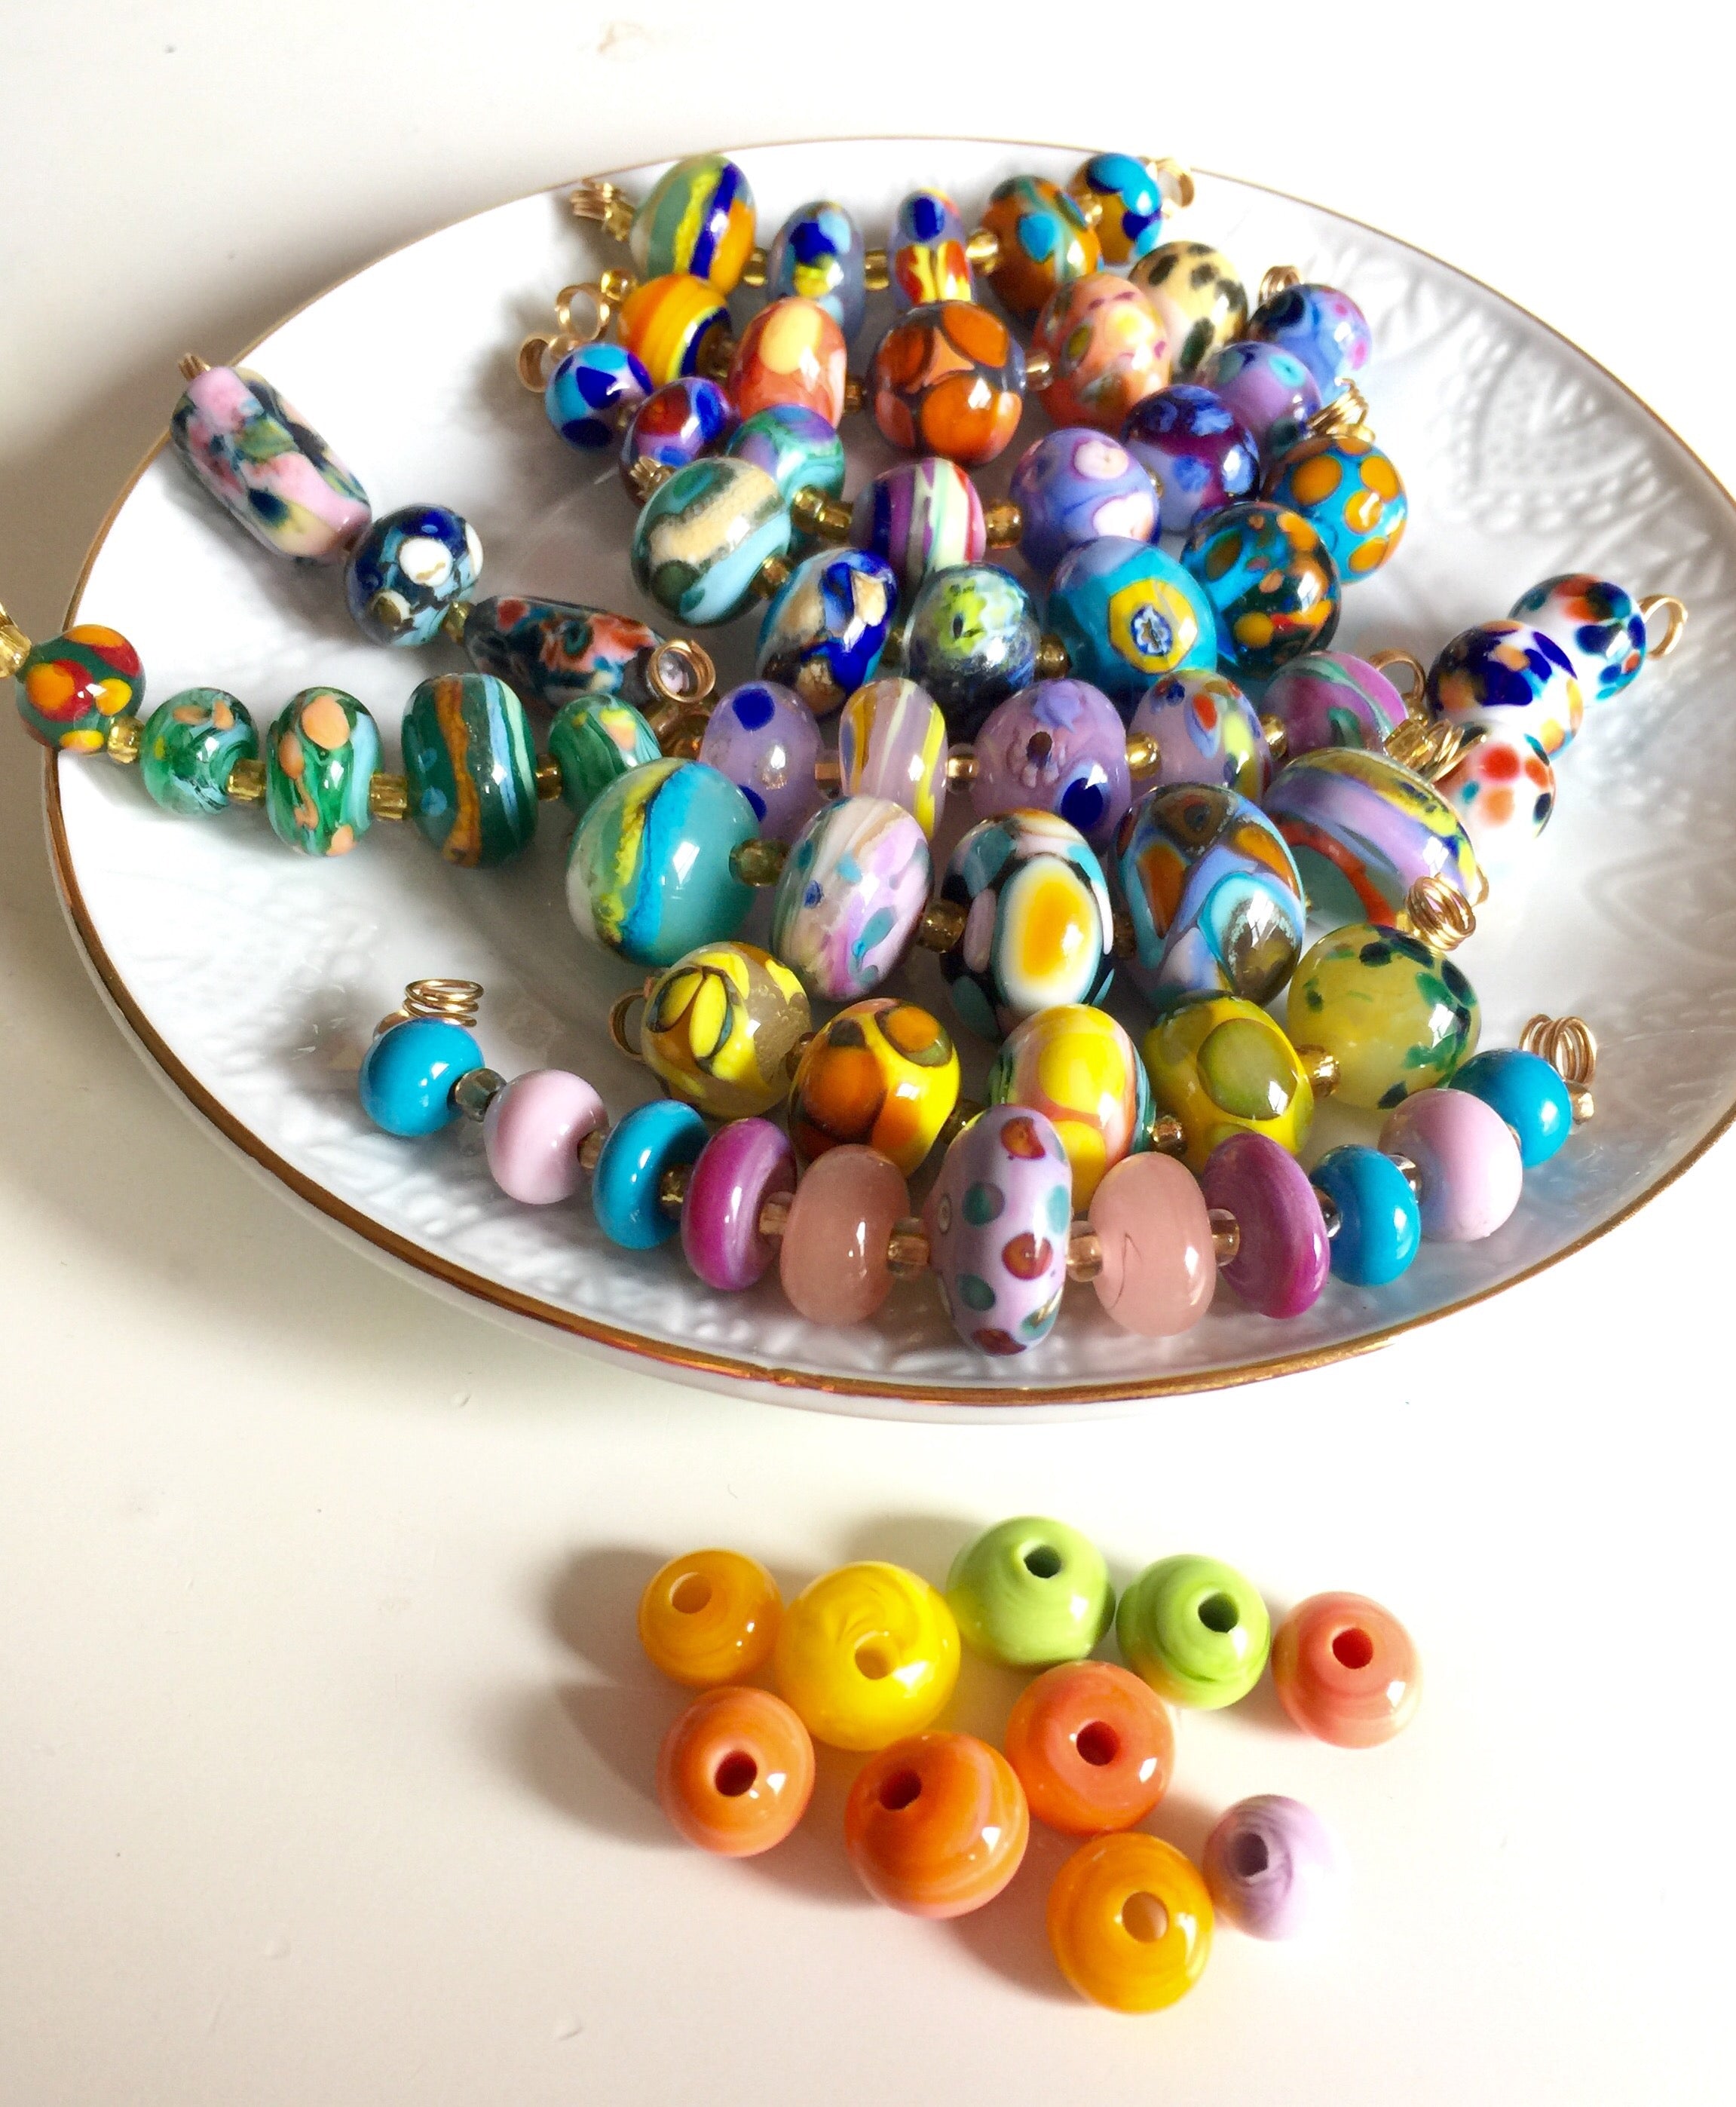 Speckled Rainbow colorful glass 14 bead set. – The Artwerks